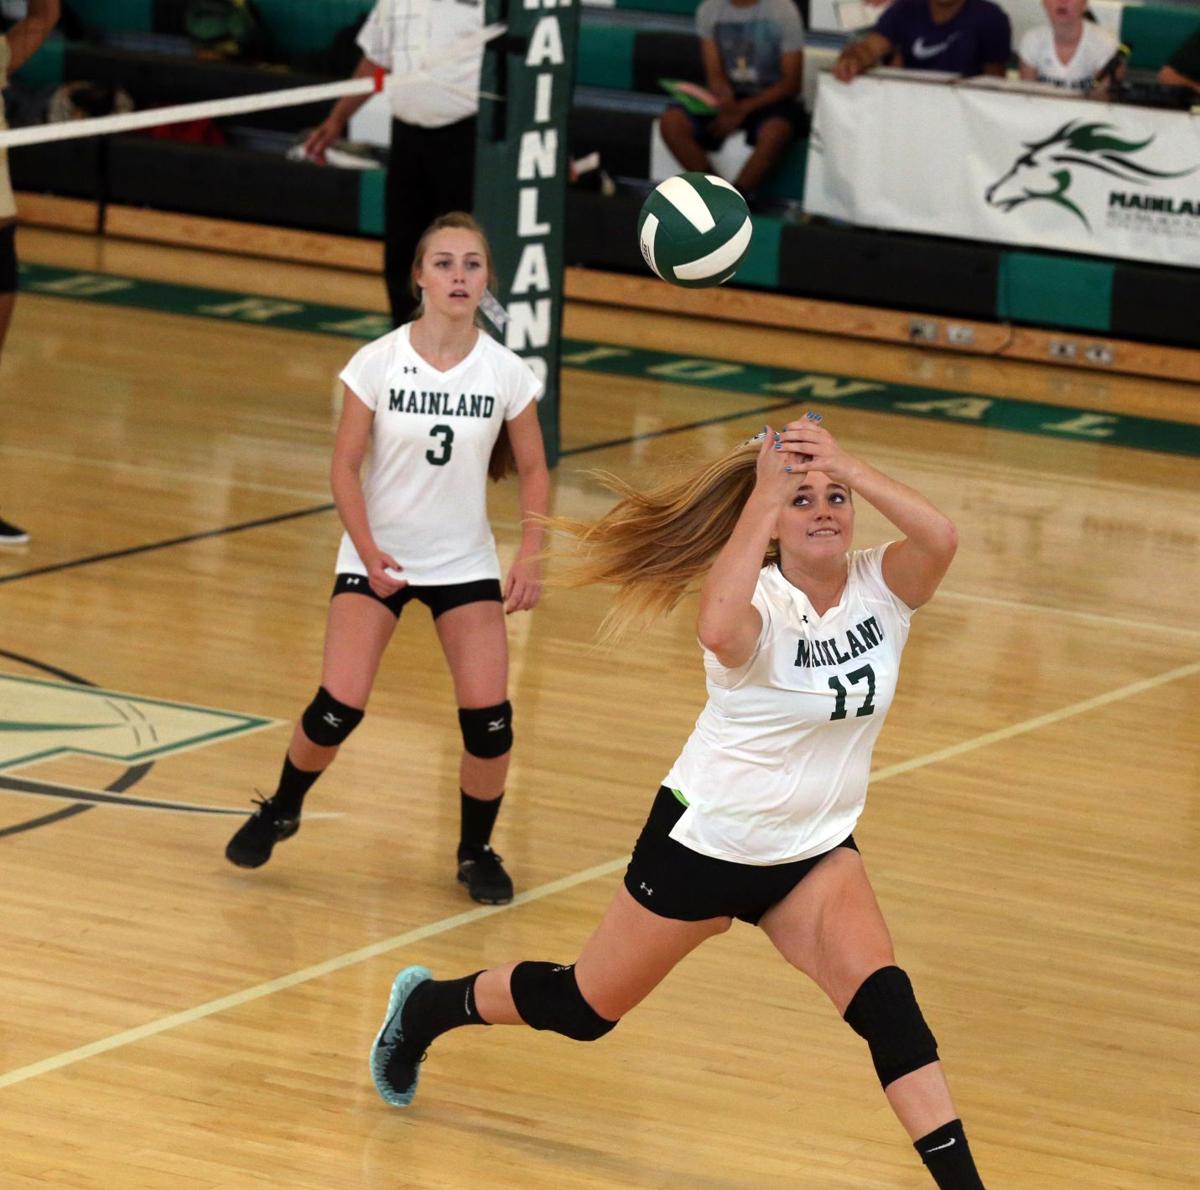 With Mainland, ACIT in CAL, girls volleyball continues to grow | High